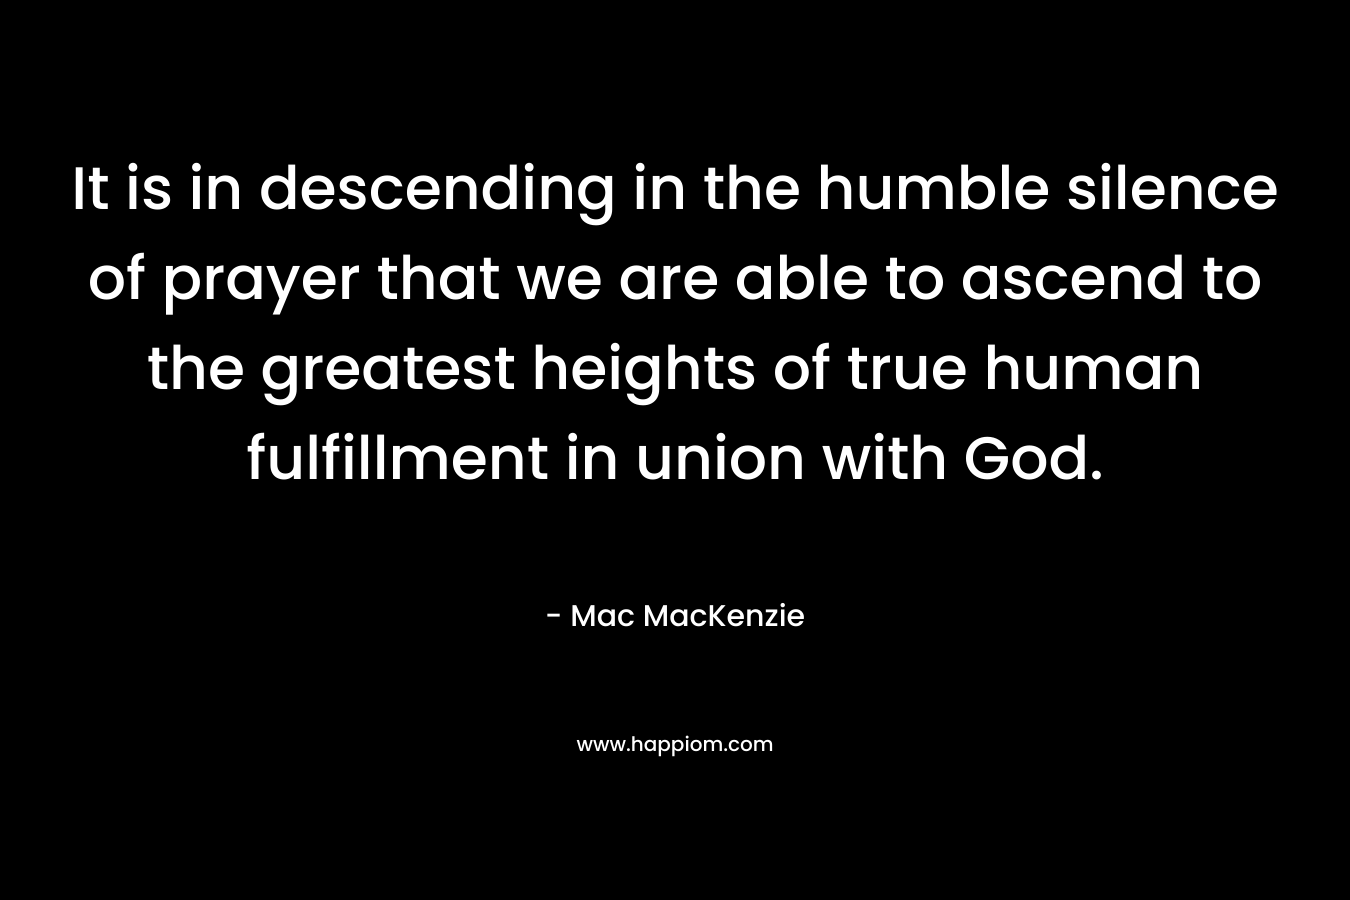 It is in descending in the humble silence of prayer that we are able to ascend to the greatest heights of true human fulfillment in union with God. – Mac MacKenzie